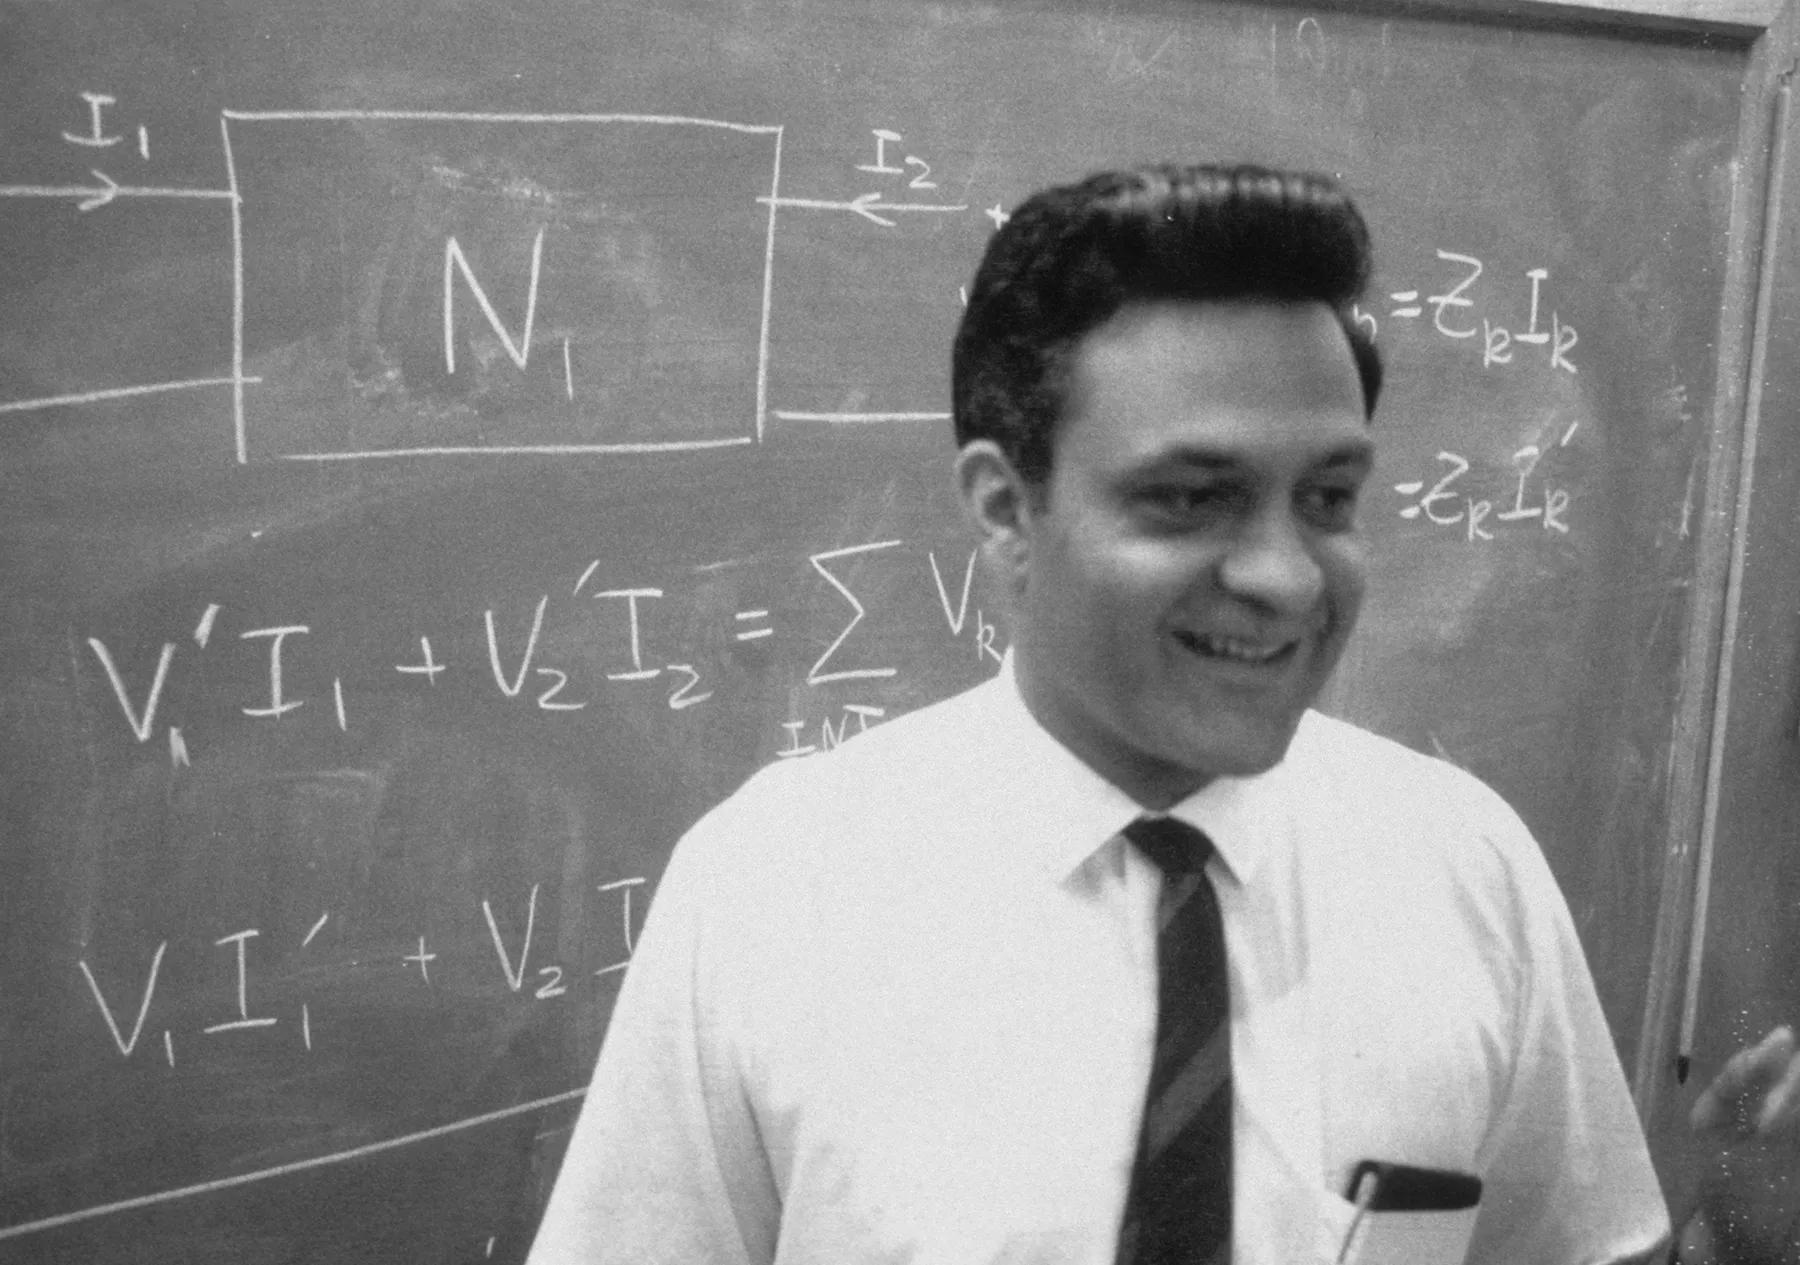 Dr. Amar Bose stands in front of a chalkboard